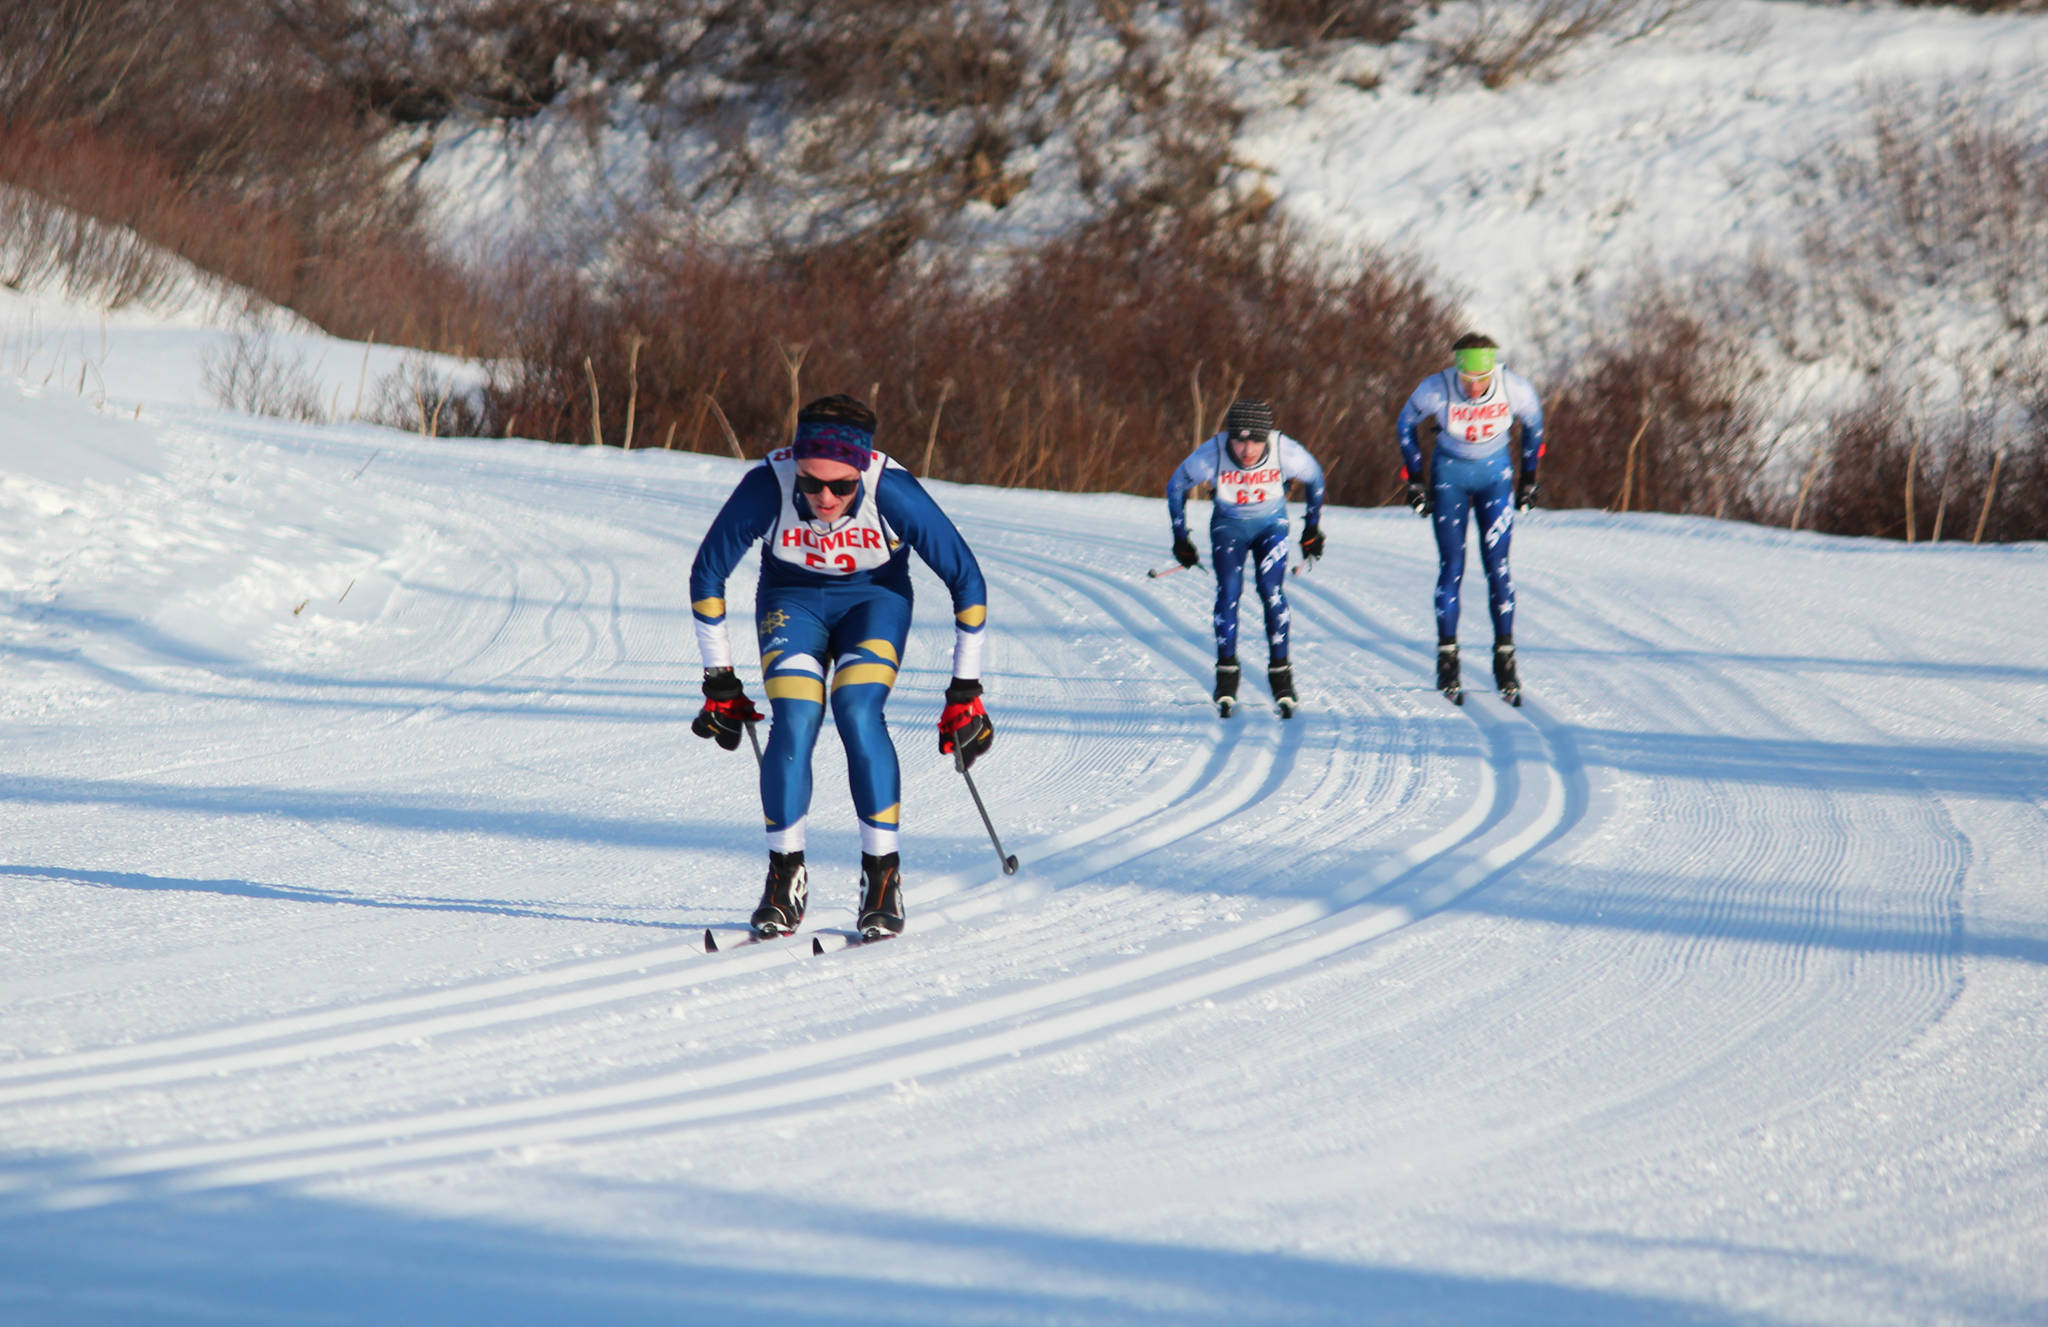 Homer’s Denver Waclawski leads two Soldotna High School skiers to the finish line of the varsity boys 5 kilometer classic race Friday, Feb. 2, 2018 at the Lookout Ski Trails near Homer, Alaska. Waclawski took third in the race. (Photo by Megan Pacer/Homer News)